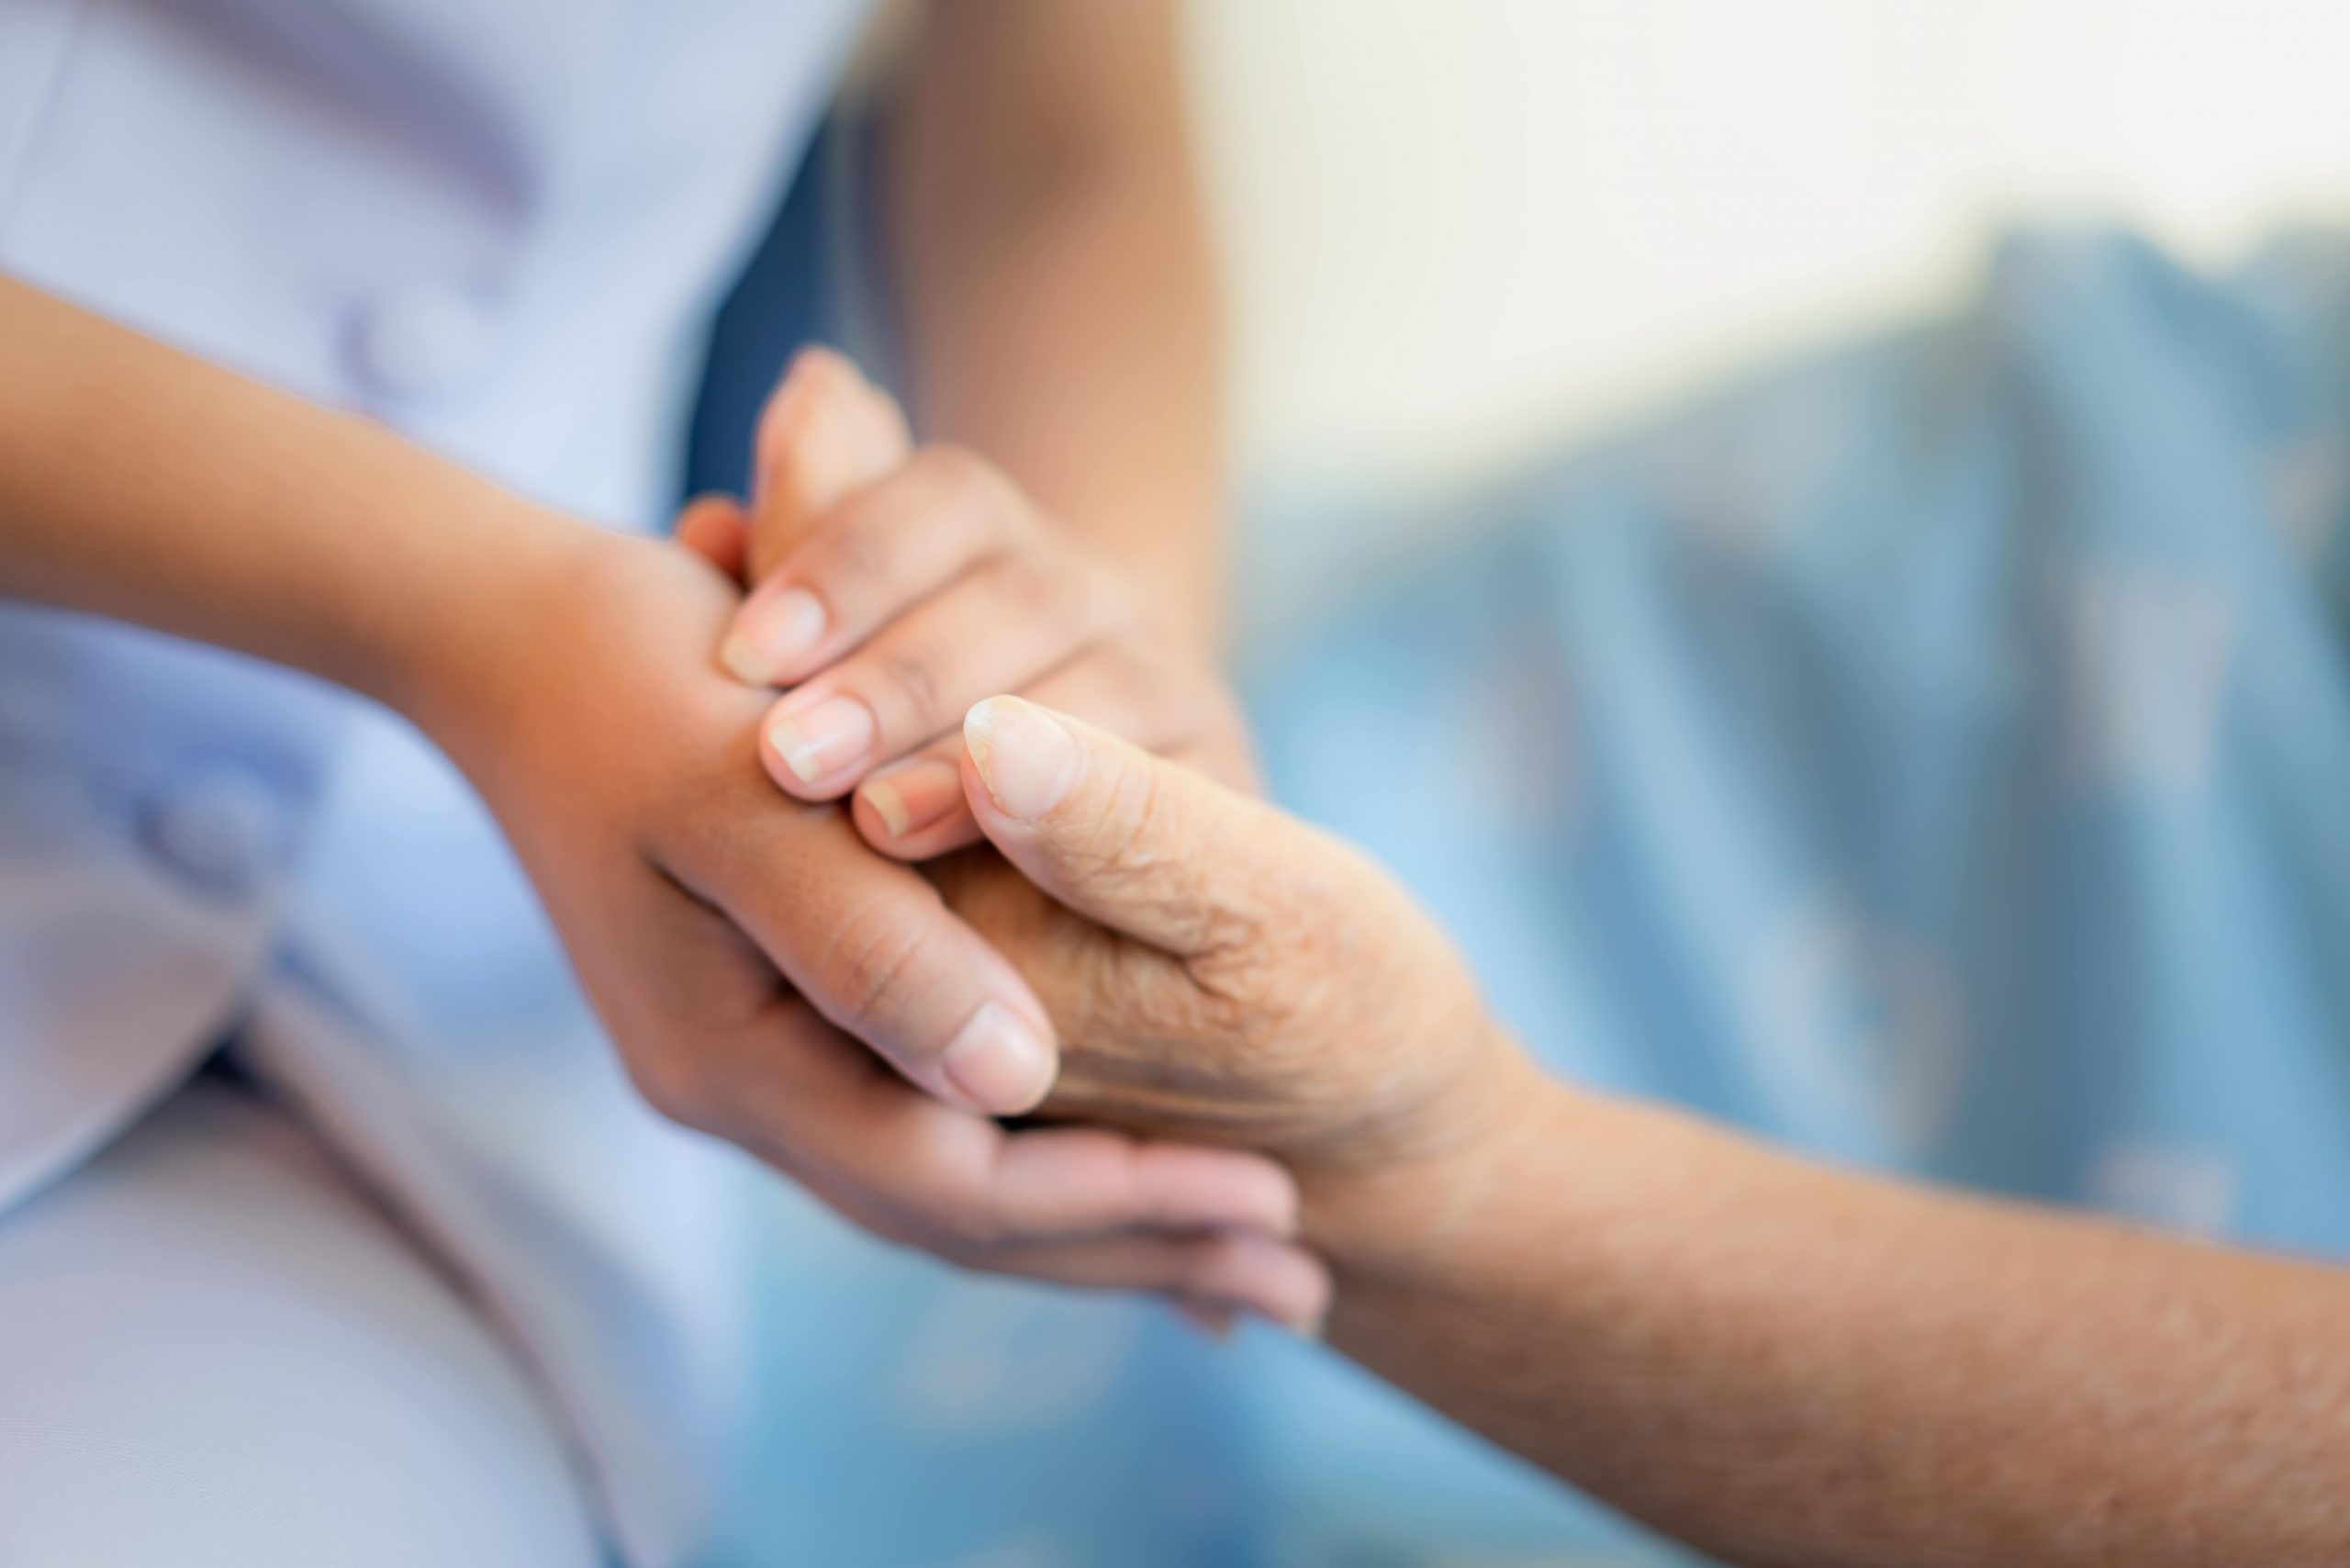 ShowEquip covers the care sector / industry. Image of a care worker comforting a patient.